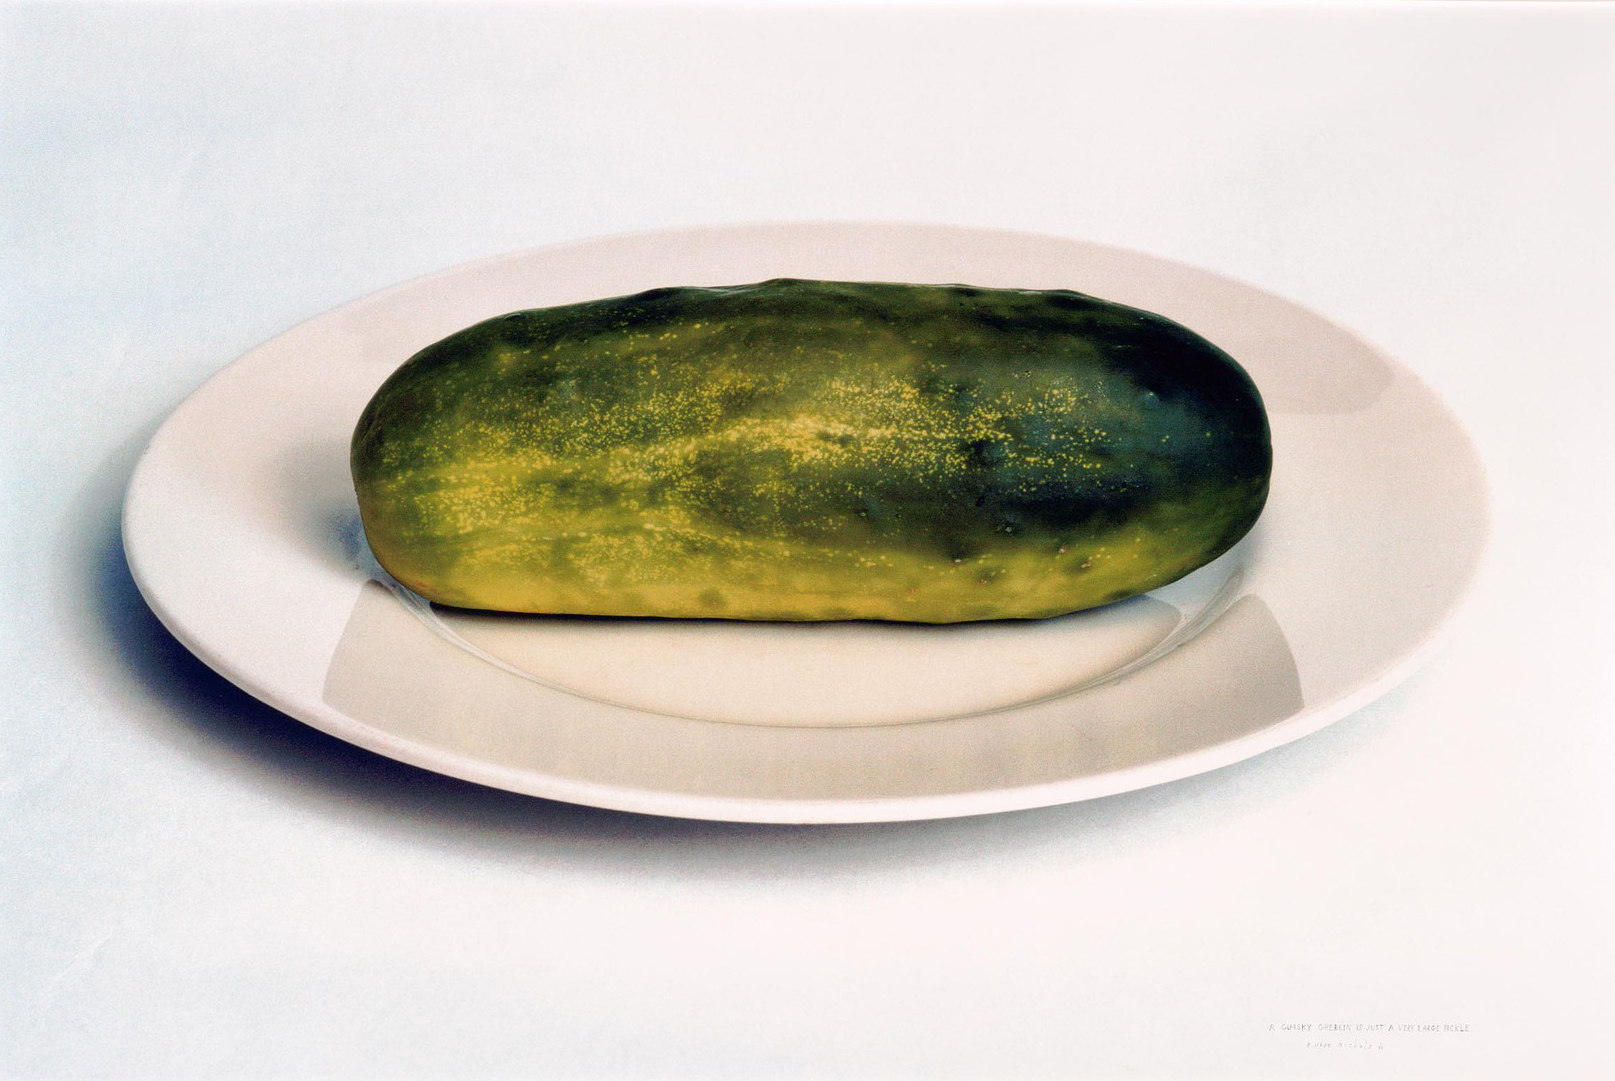 A photo of a large pickle sitting on a white plate against a white background